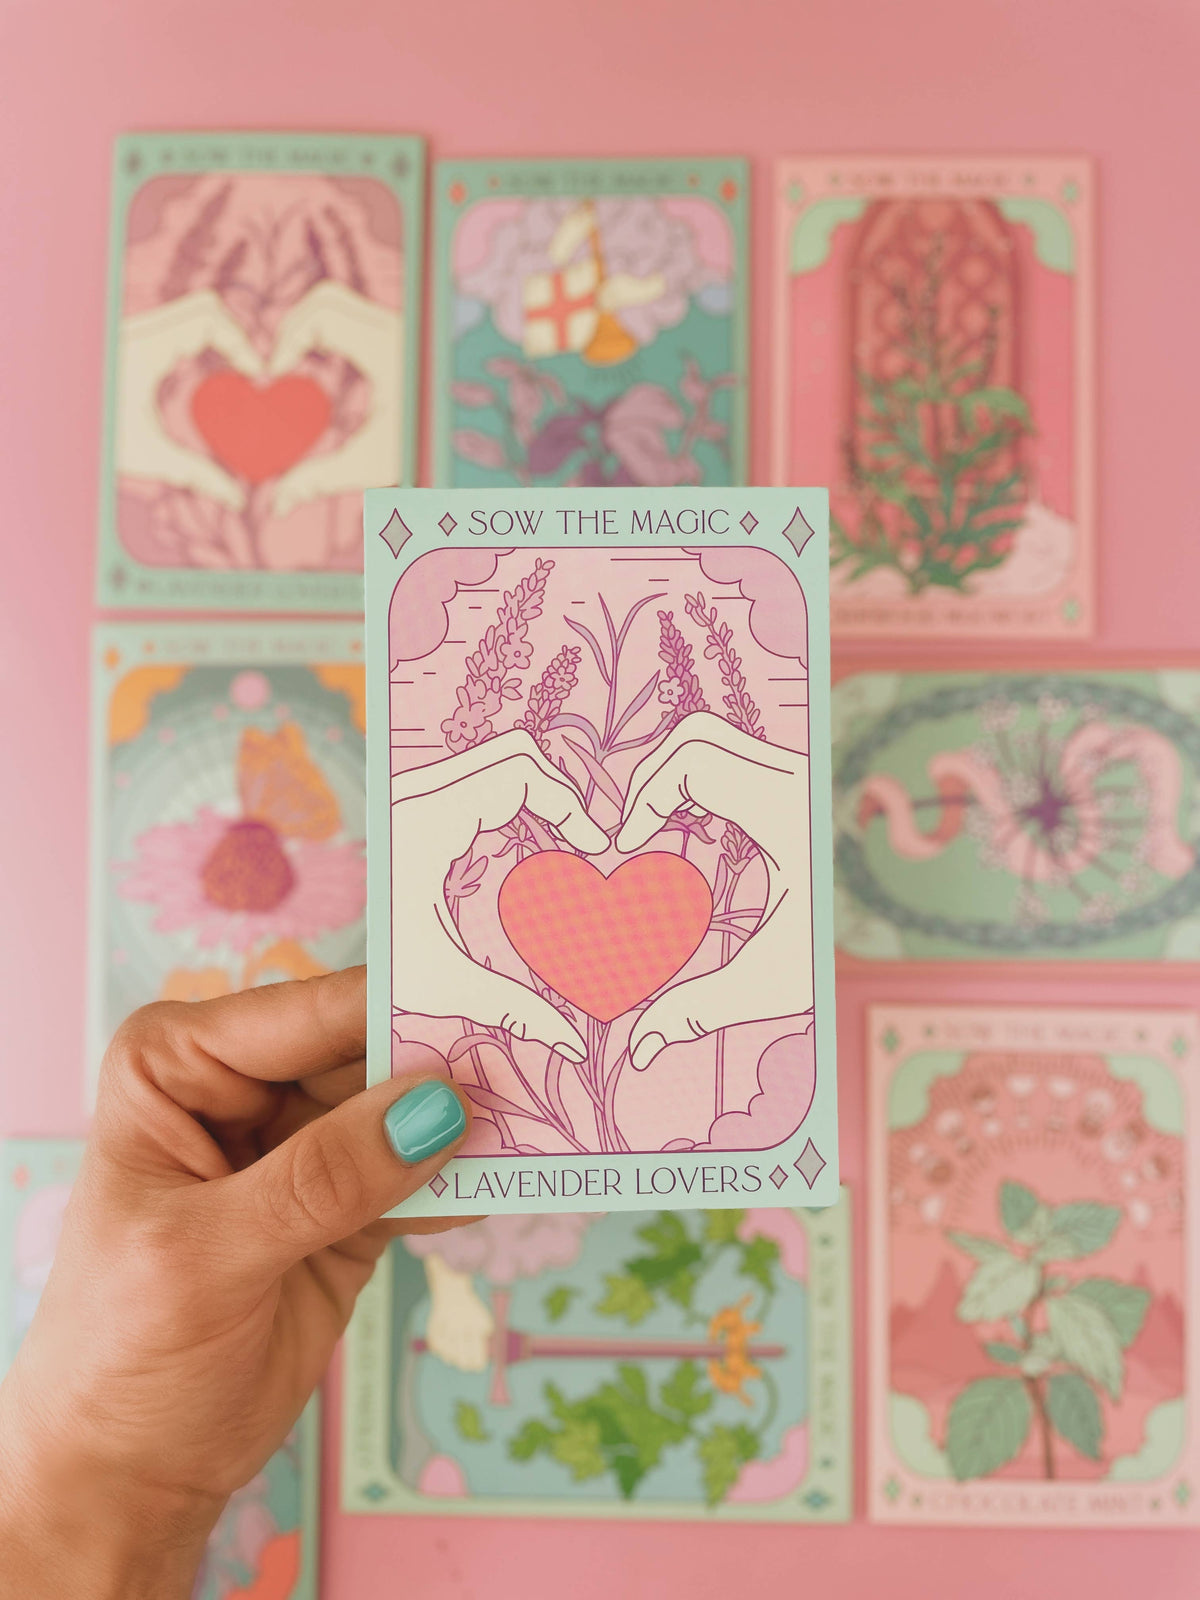 Sow the Magic Lavender Lovers Tarot Garden + Gift Seed Packet